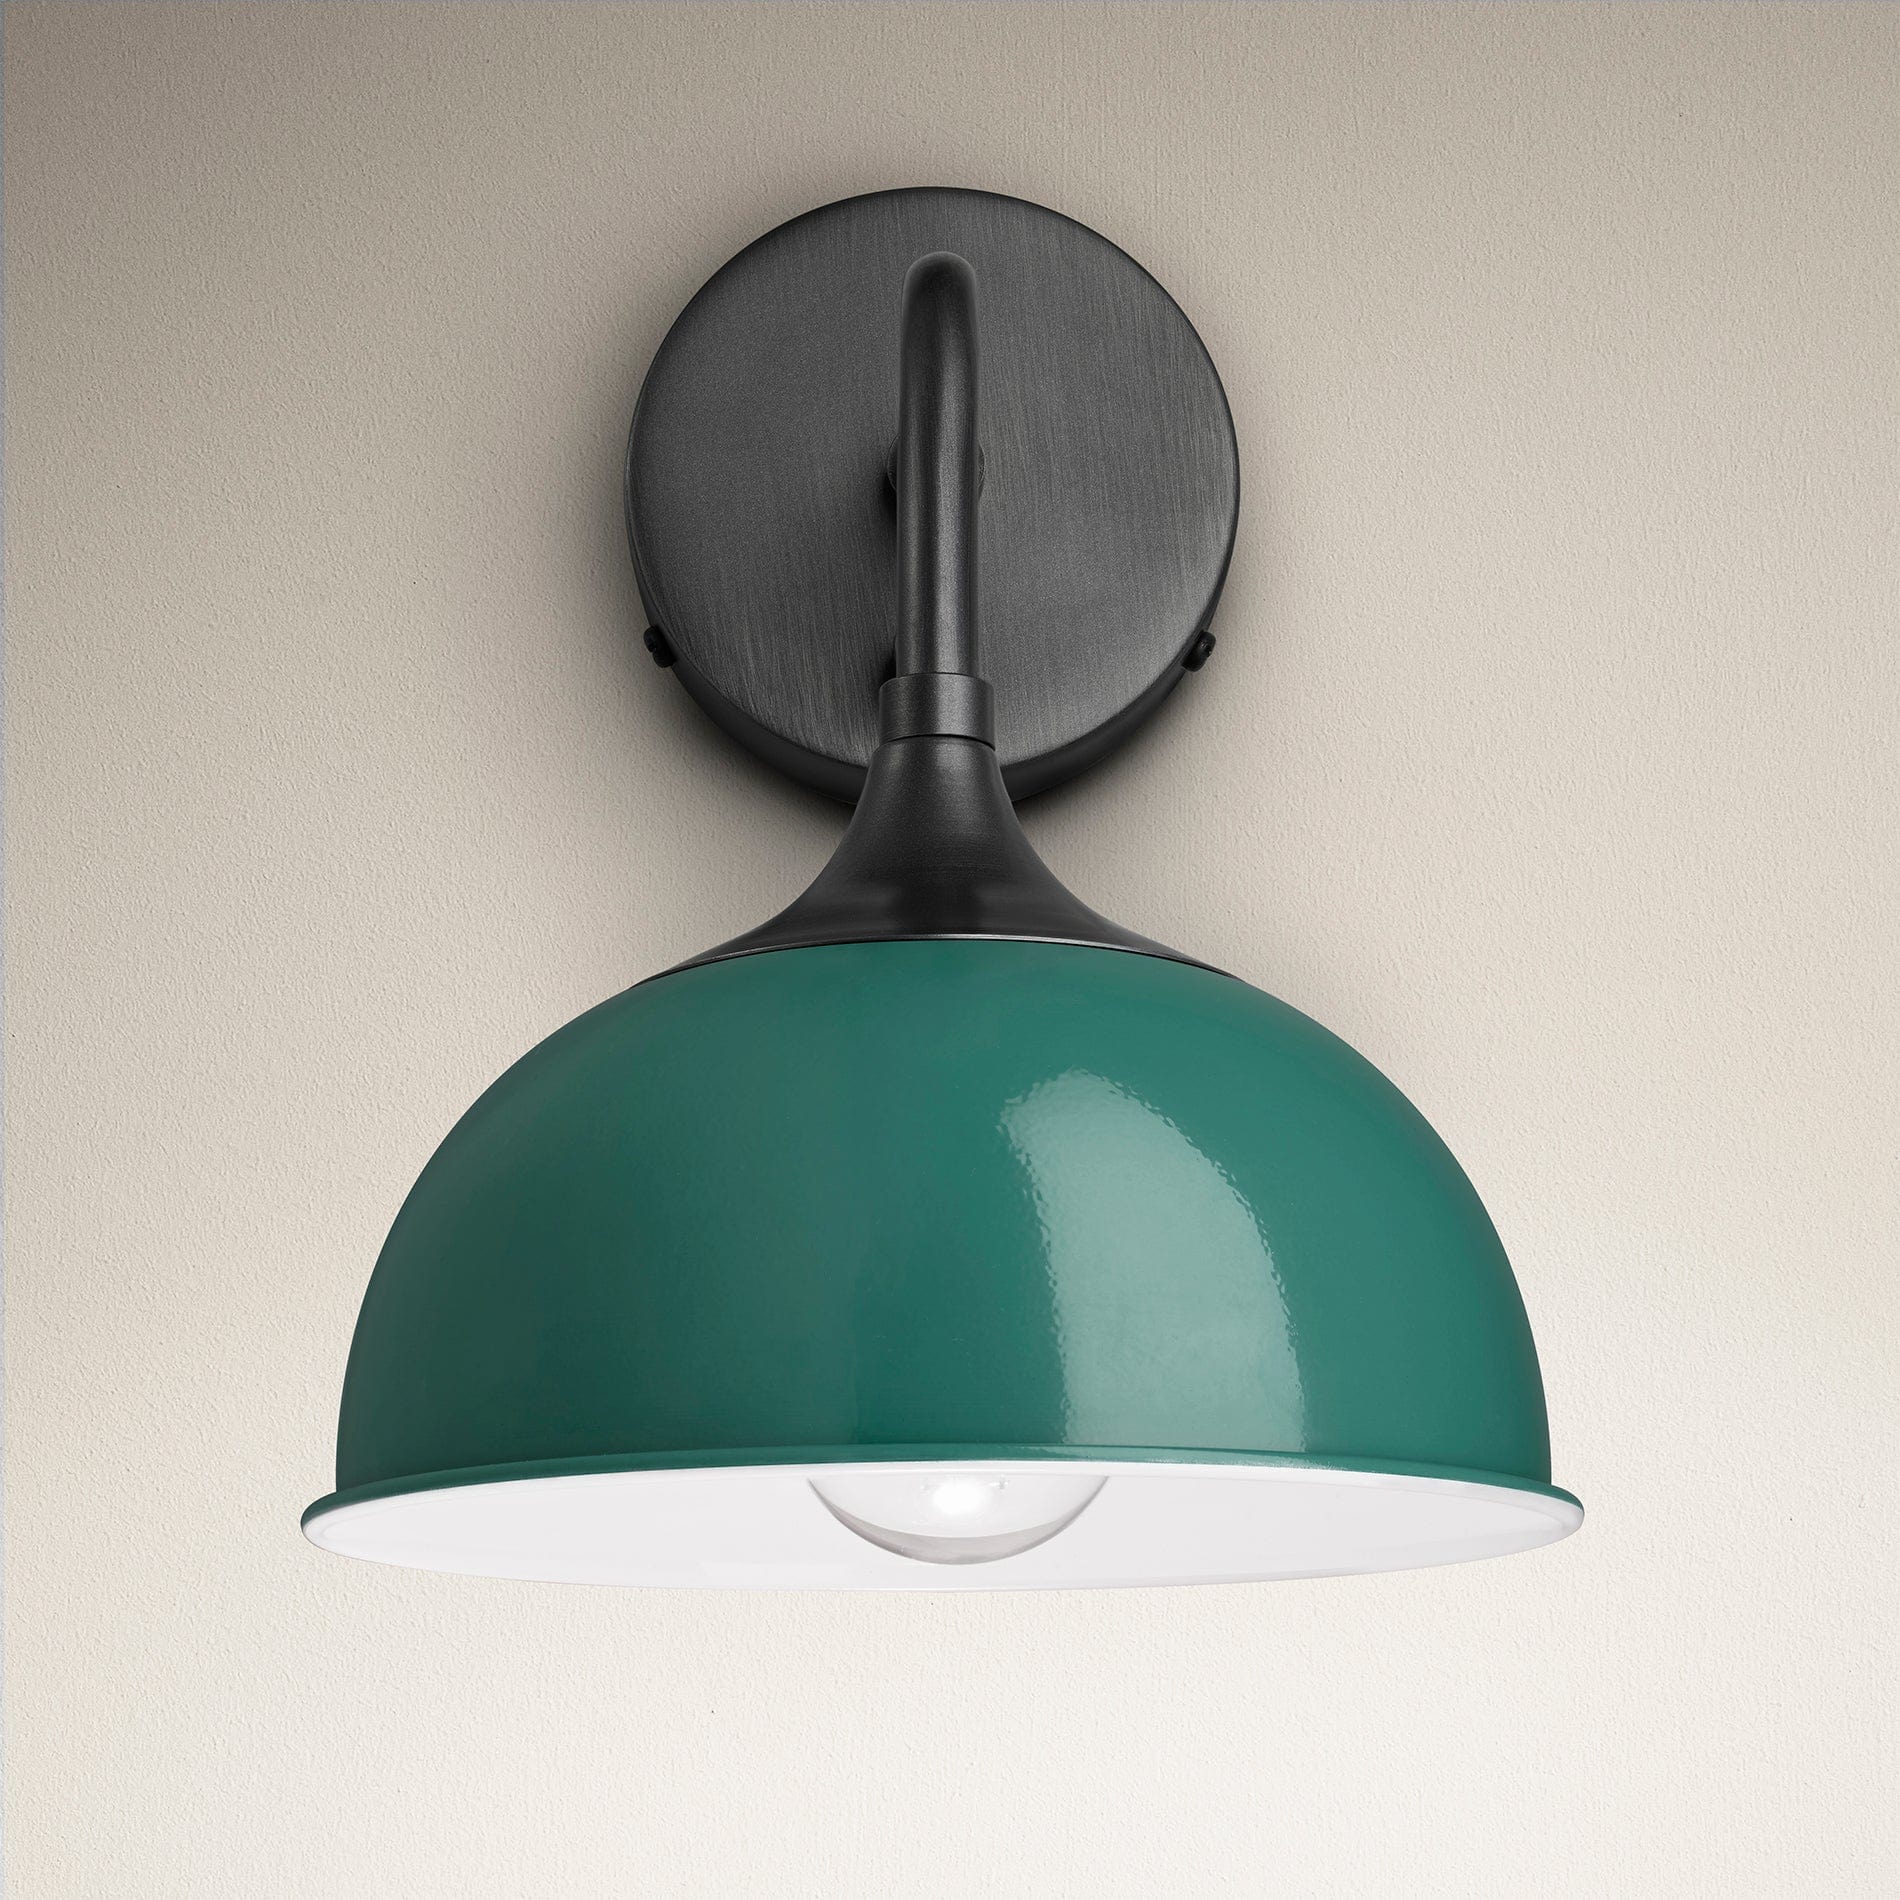 Chelsea Dome Wall Light - 8 Inch - Turquoise Industville